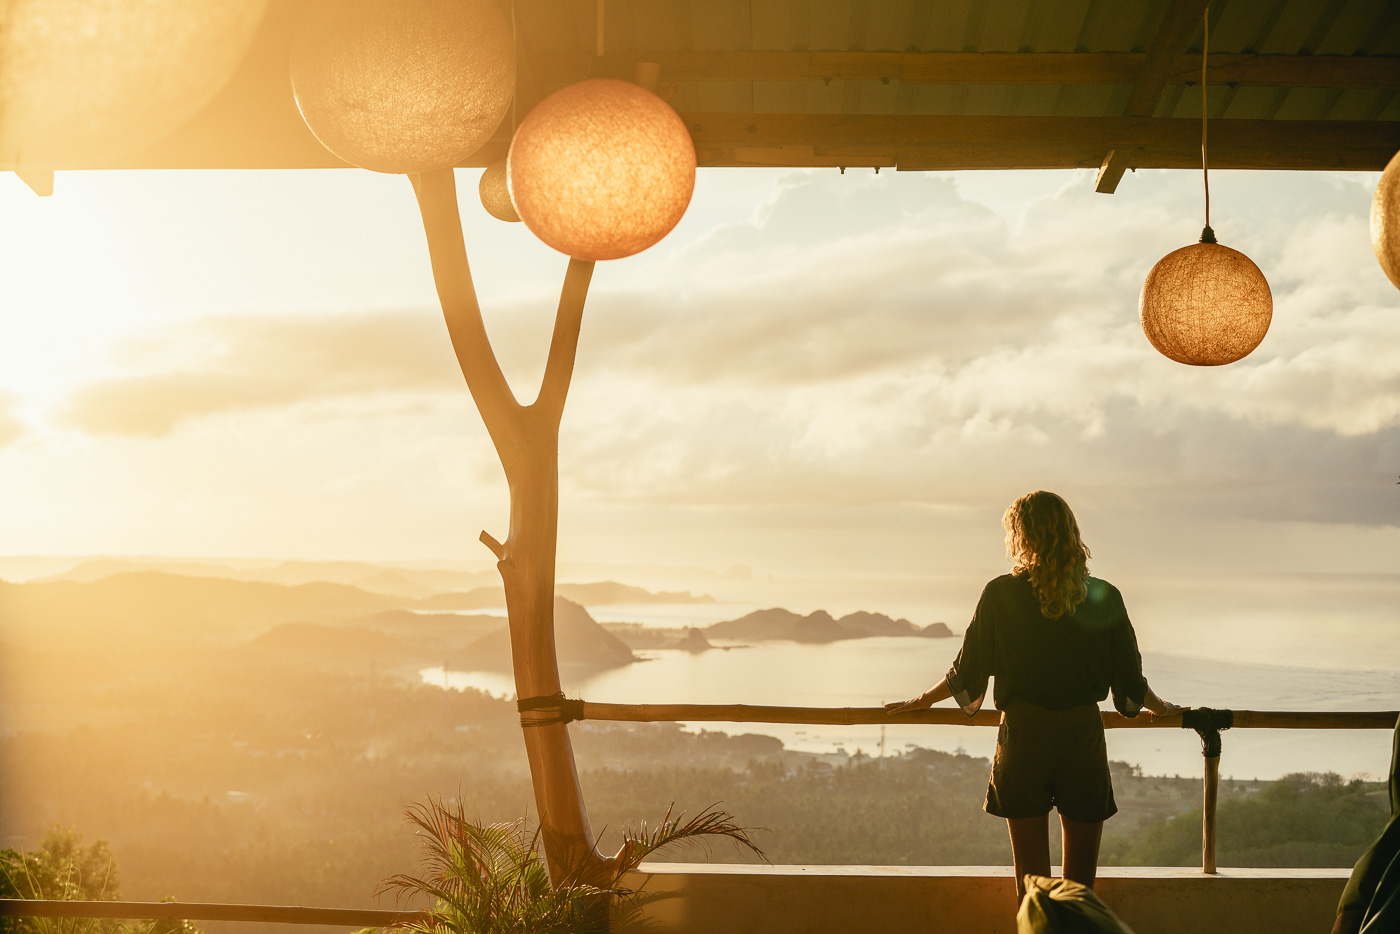 Annie watching sunrise at the lookout bar over Kuta Lombok. Photo by Sony Ambassador Stefan Haworth